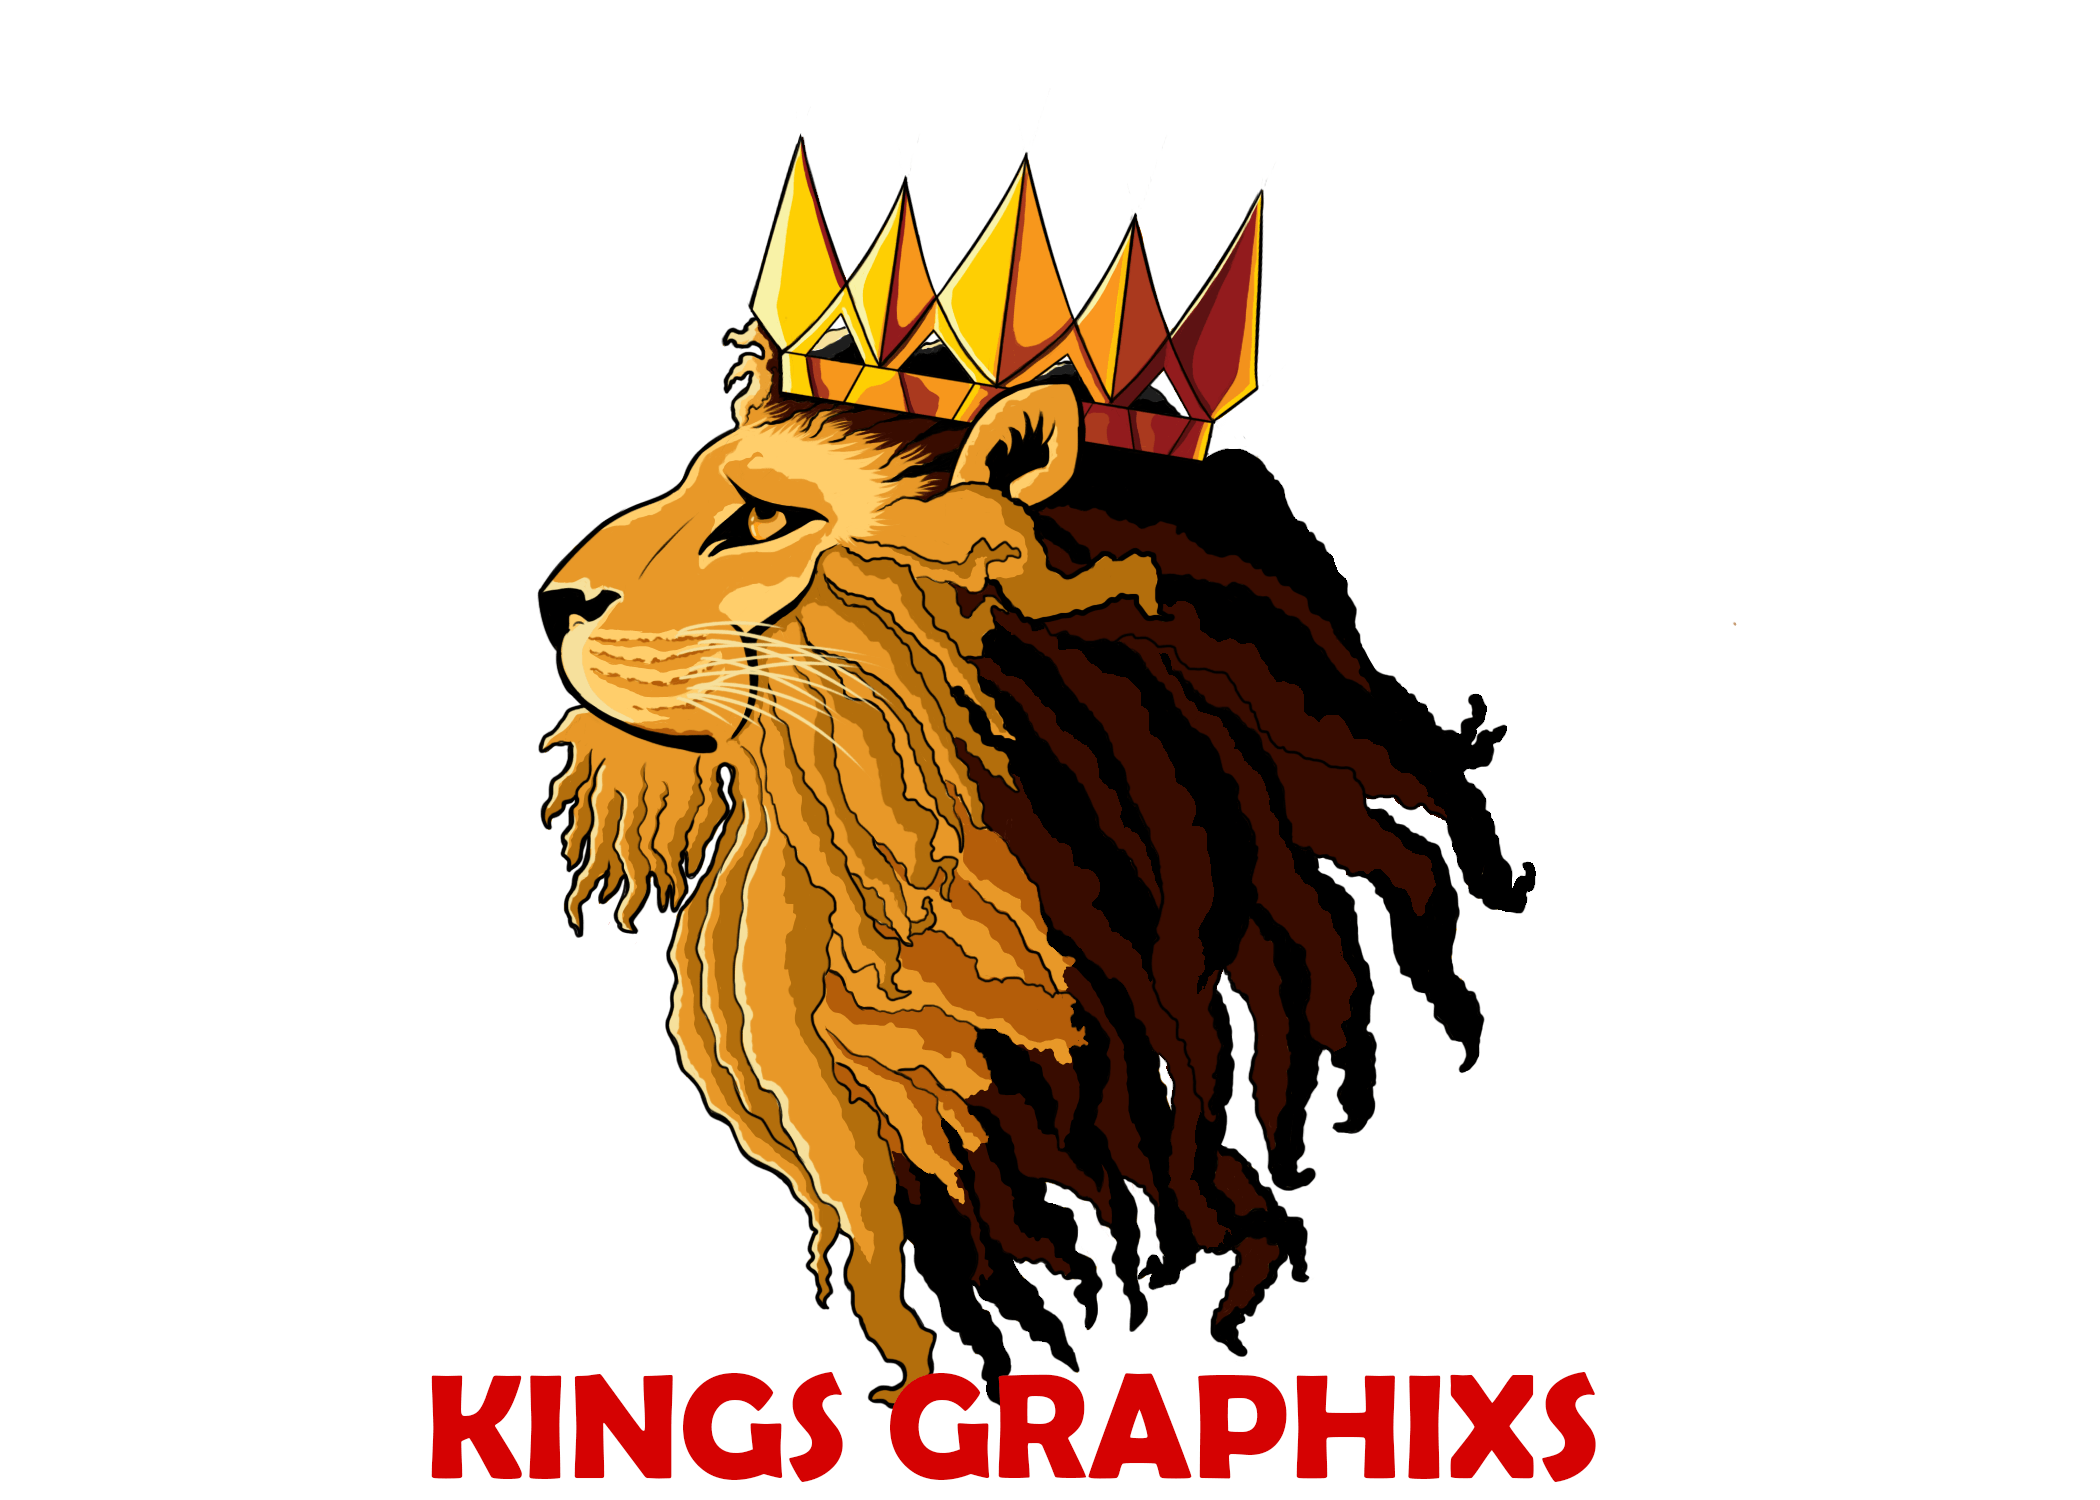 I am a traditional and digital artist that is working on my own graphic design and t-shirt business.